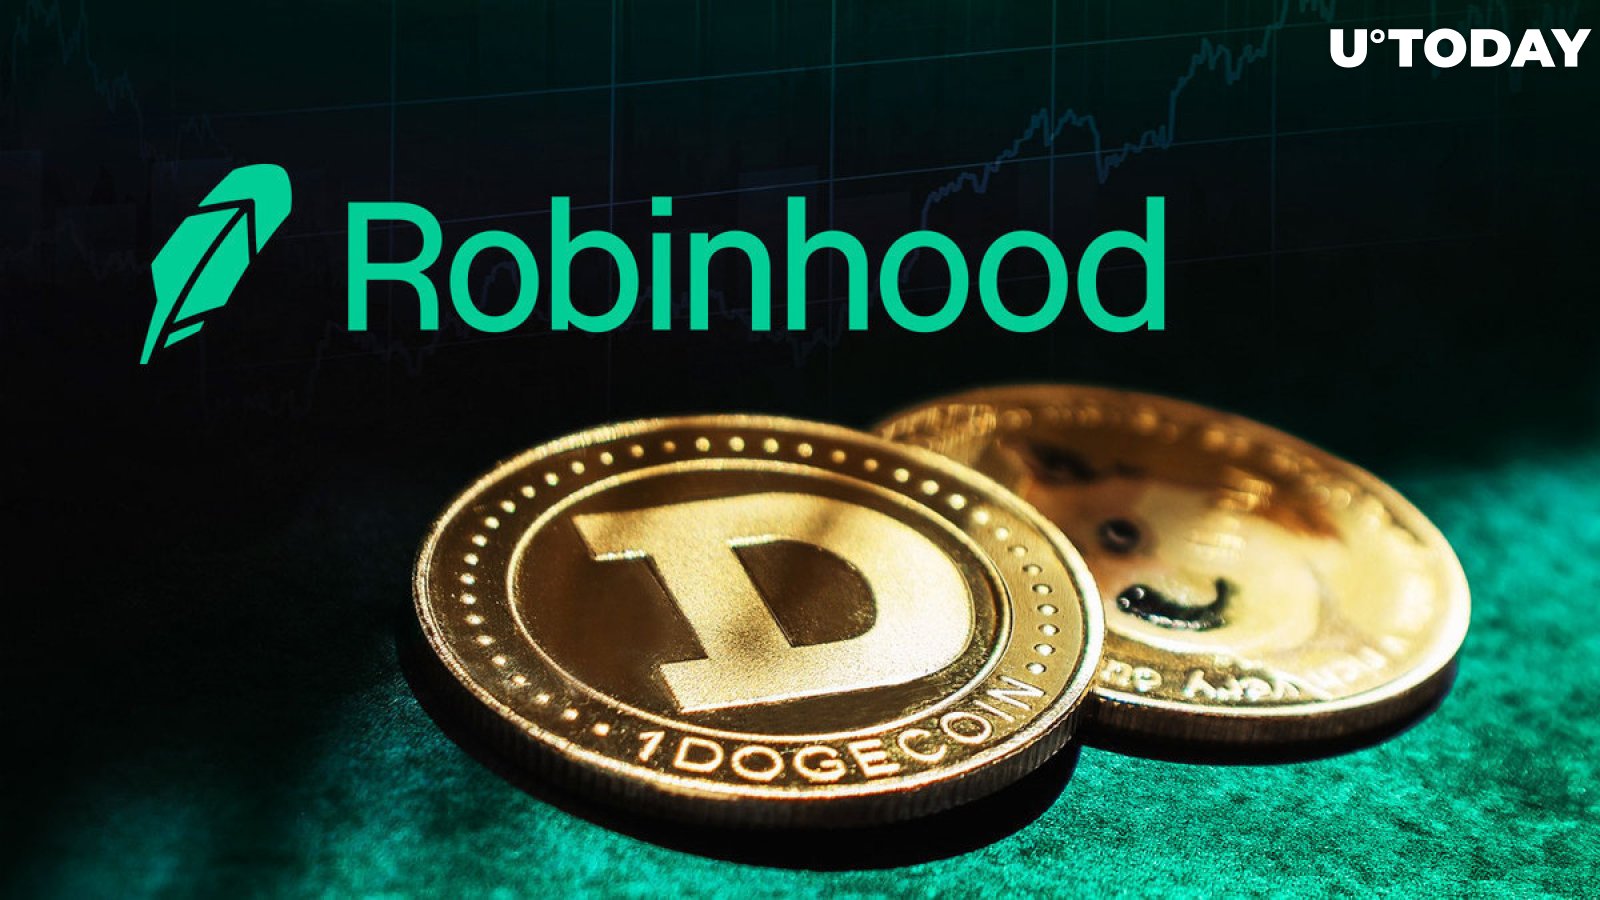 650 Million Dogecoin (DOGE) Transferred to Robinhood as Price Levels Rise